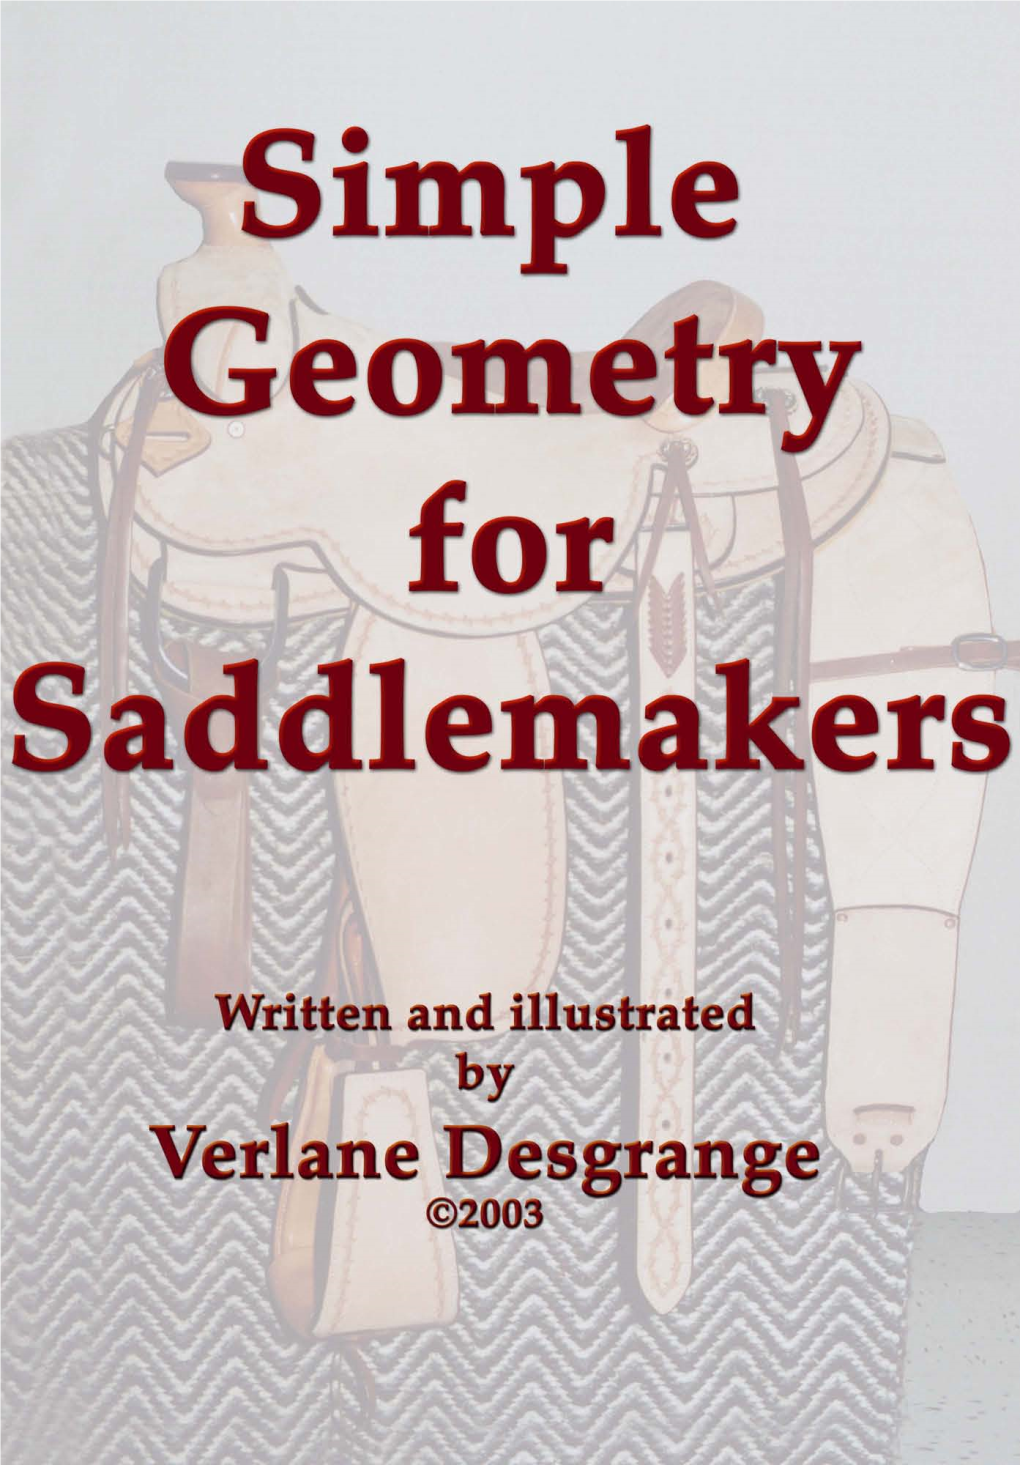 Simple Geometry for Saddlemakers Written and Illustrated by Verlane Desgrange ©2003